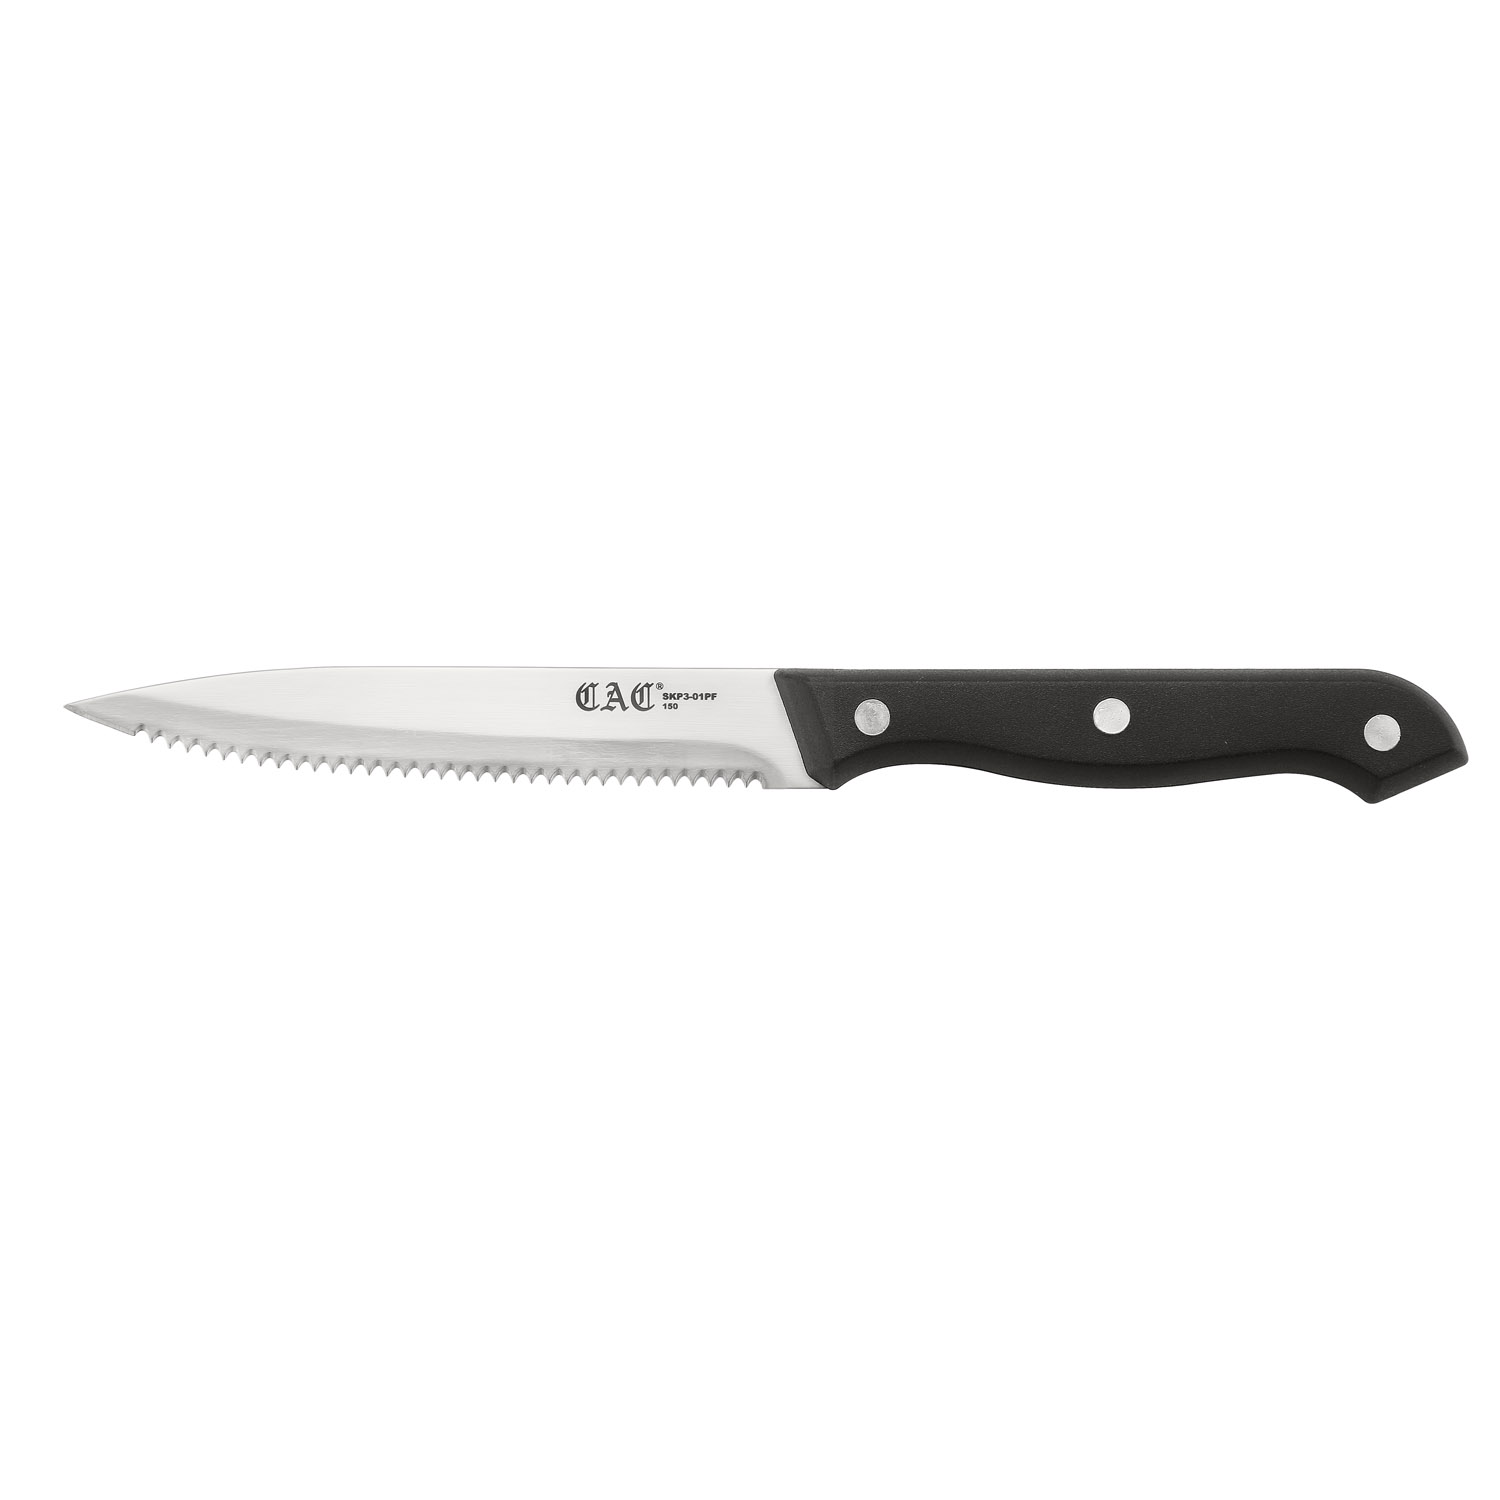 CAC China SKP3-01PF Pointed Tip Steak Knife with Plastic Handle 4 1/2" - 1 dozen